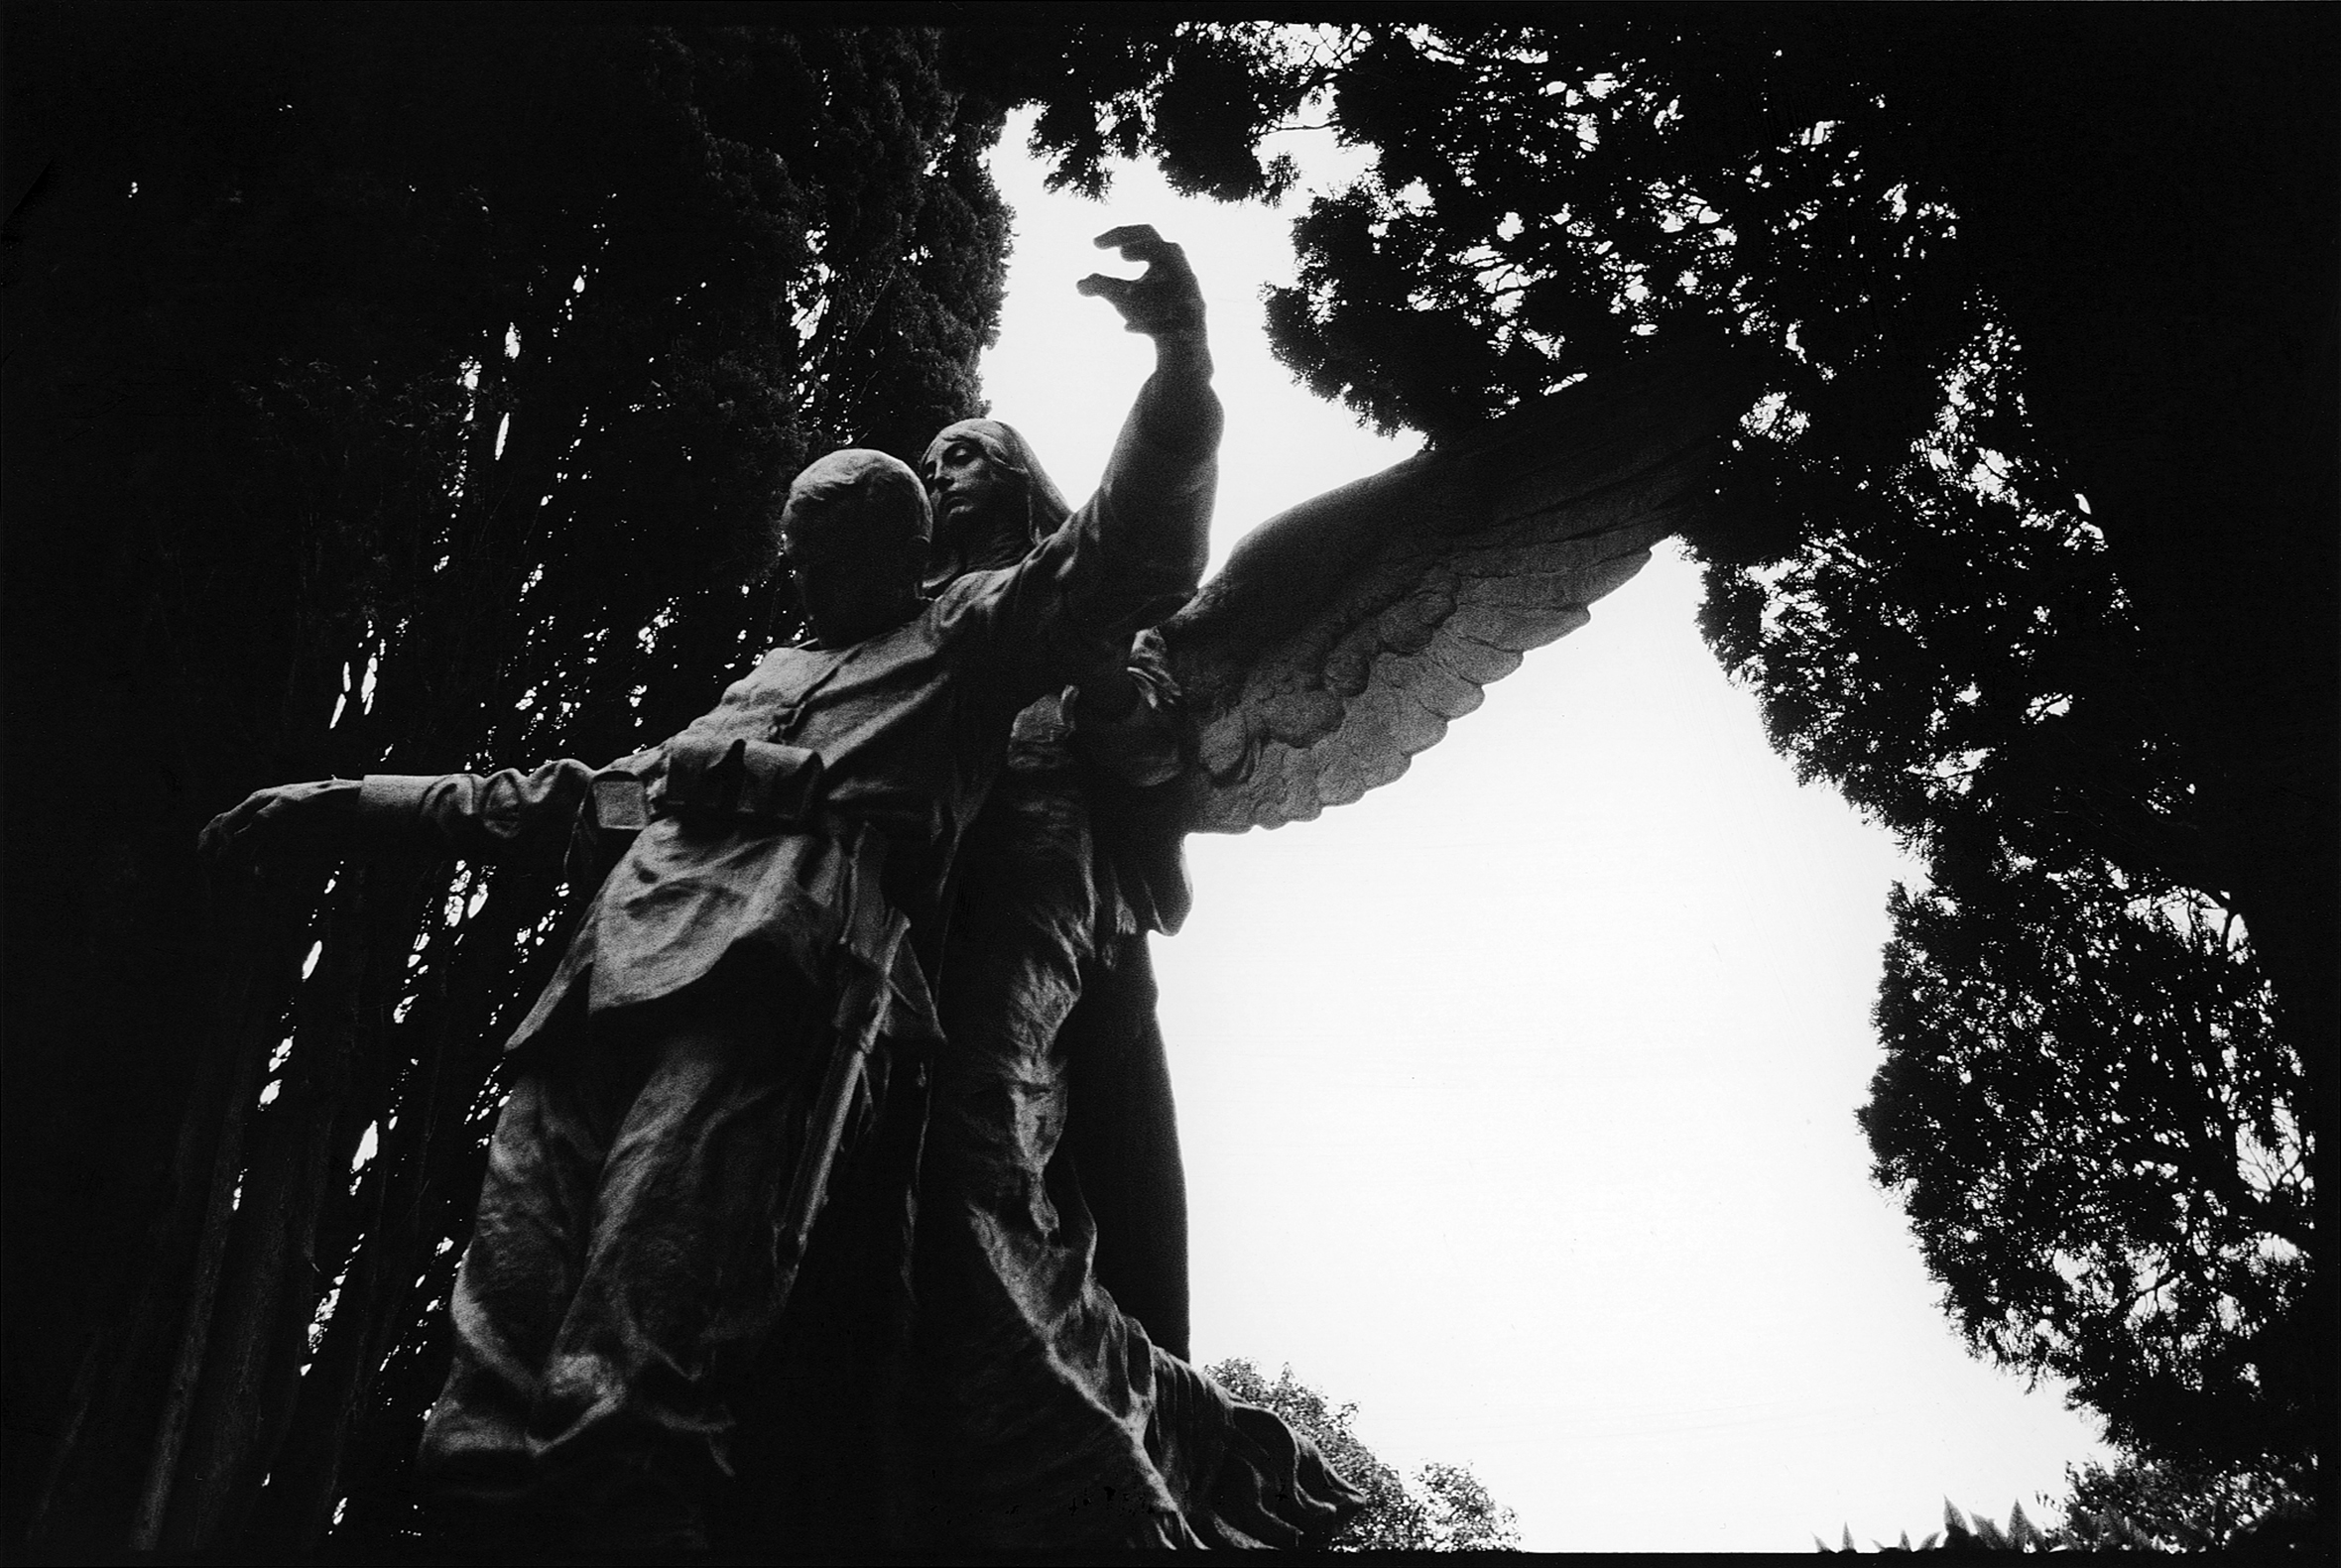 A statue of an angel with outstretched wings carrying a dead soldier.